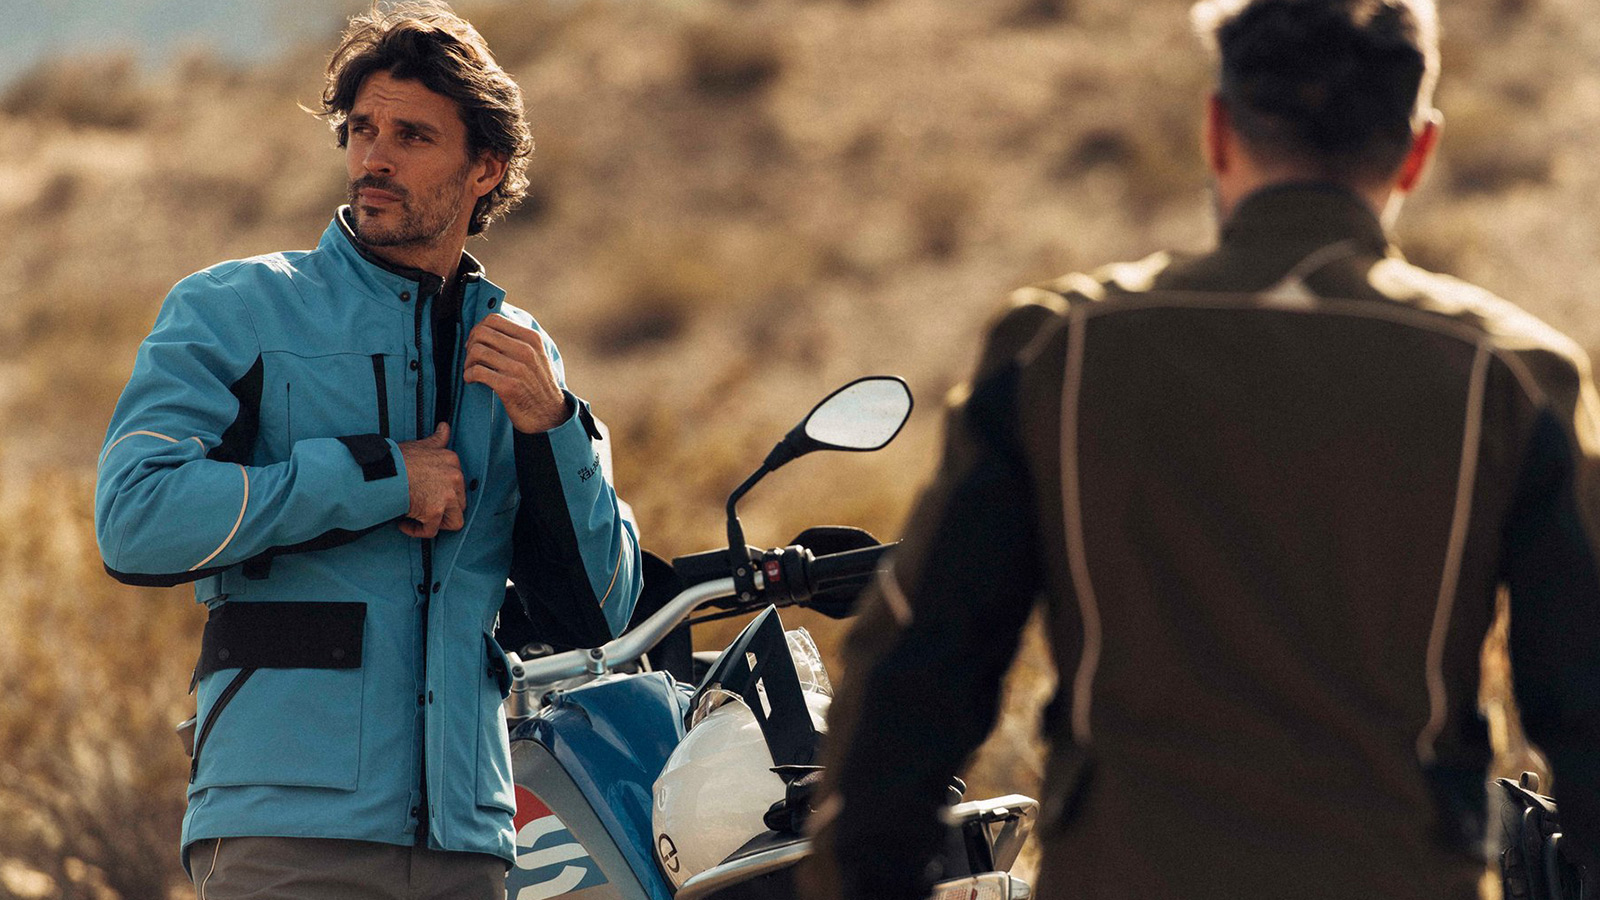 Aether Divide Motorcycle Jacket